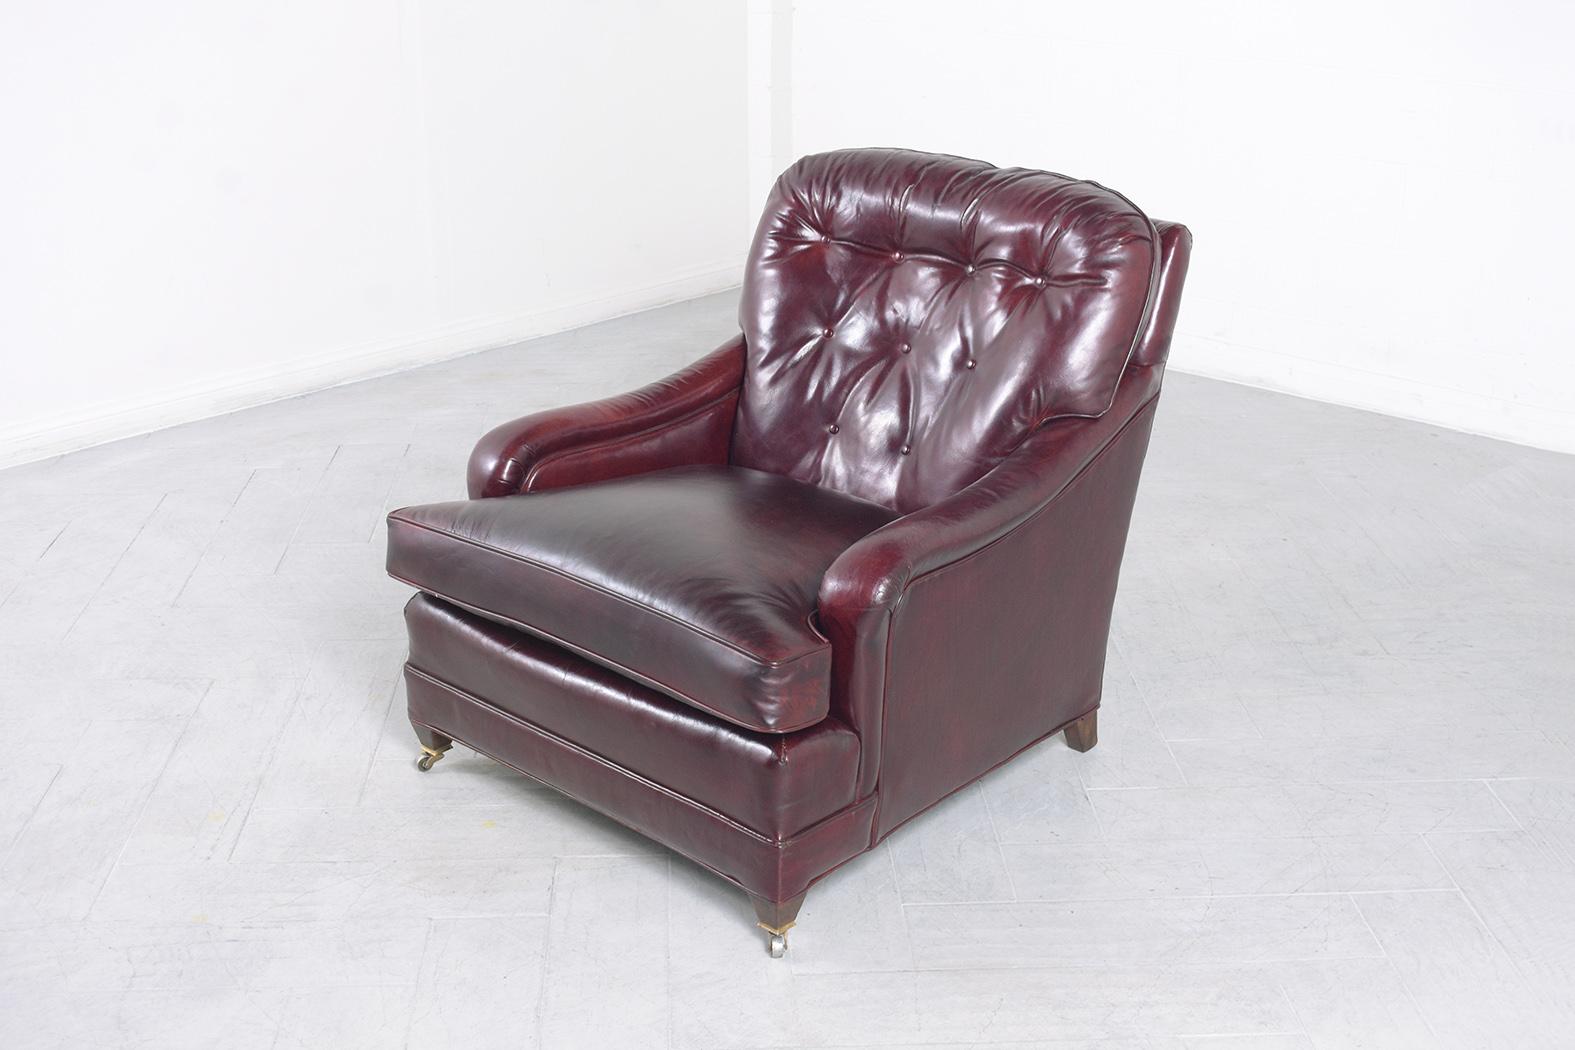 Early 1900s Antique English Chesterfield Chair in Deep Cordova Leather 1